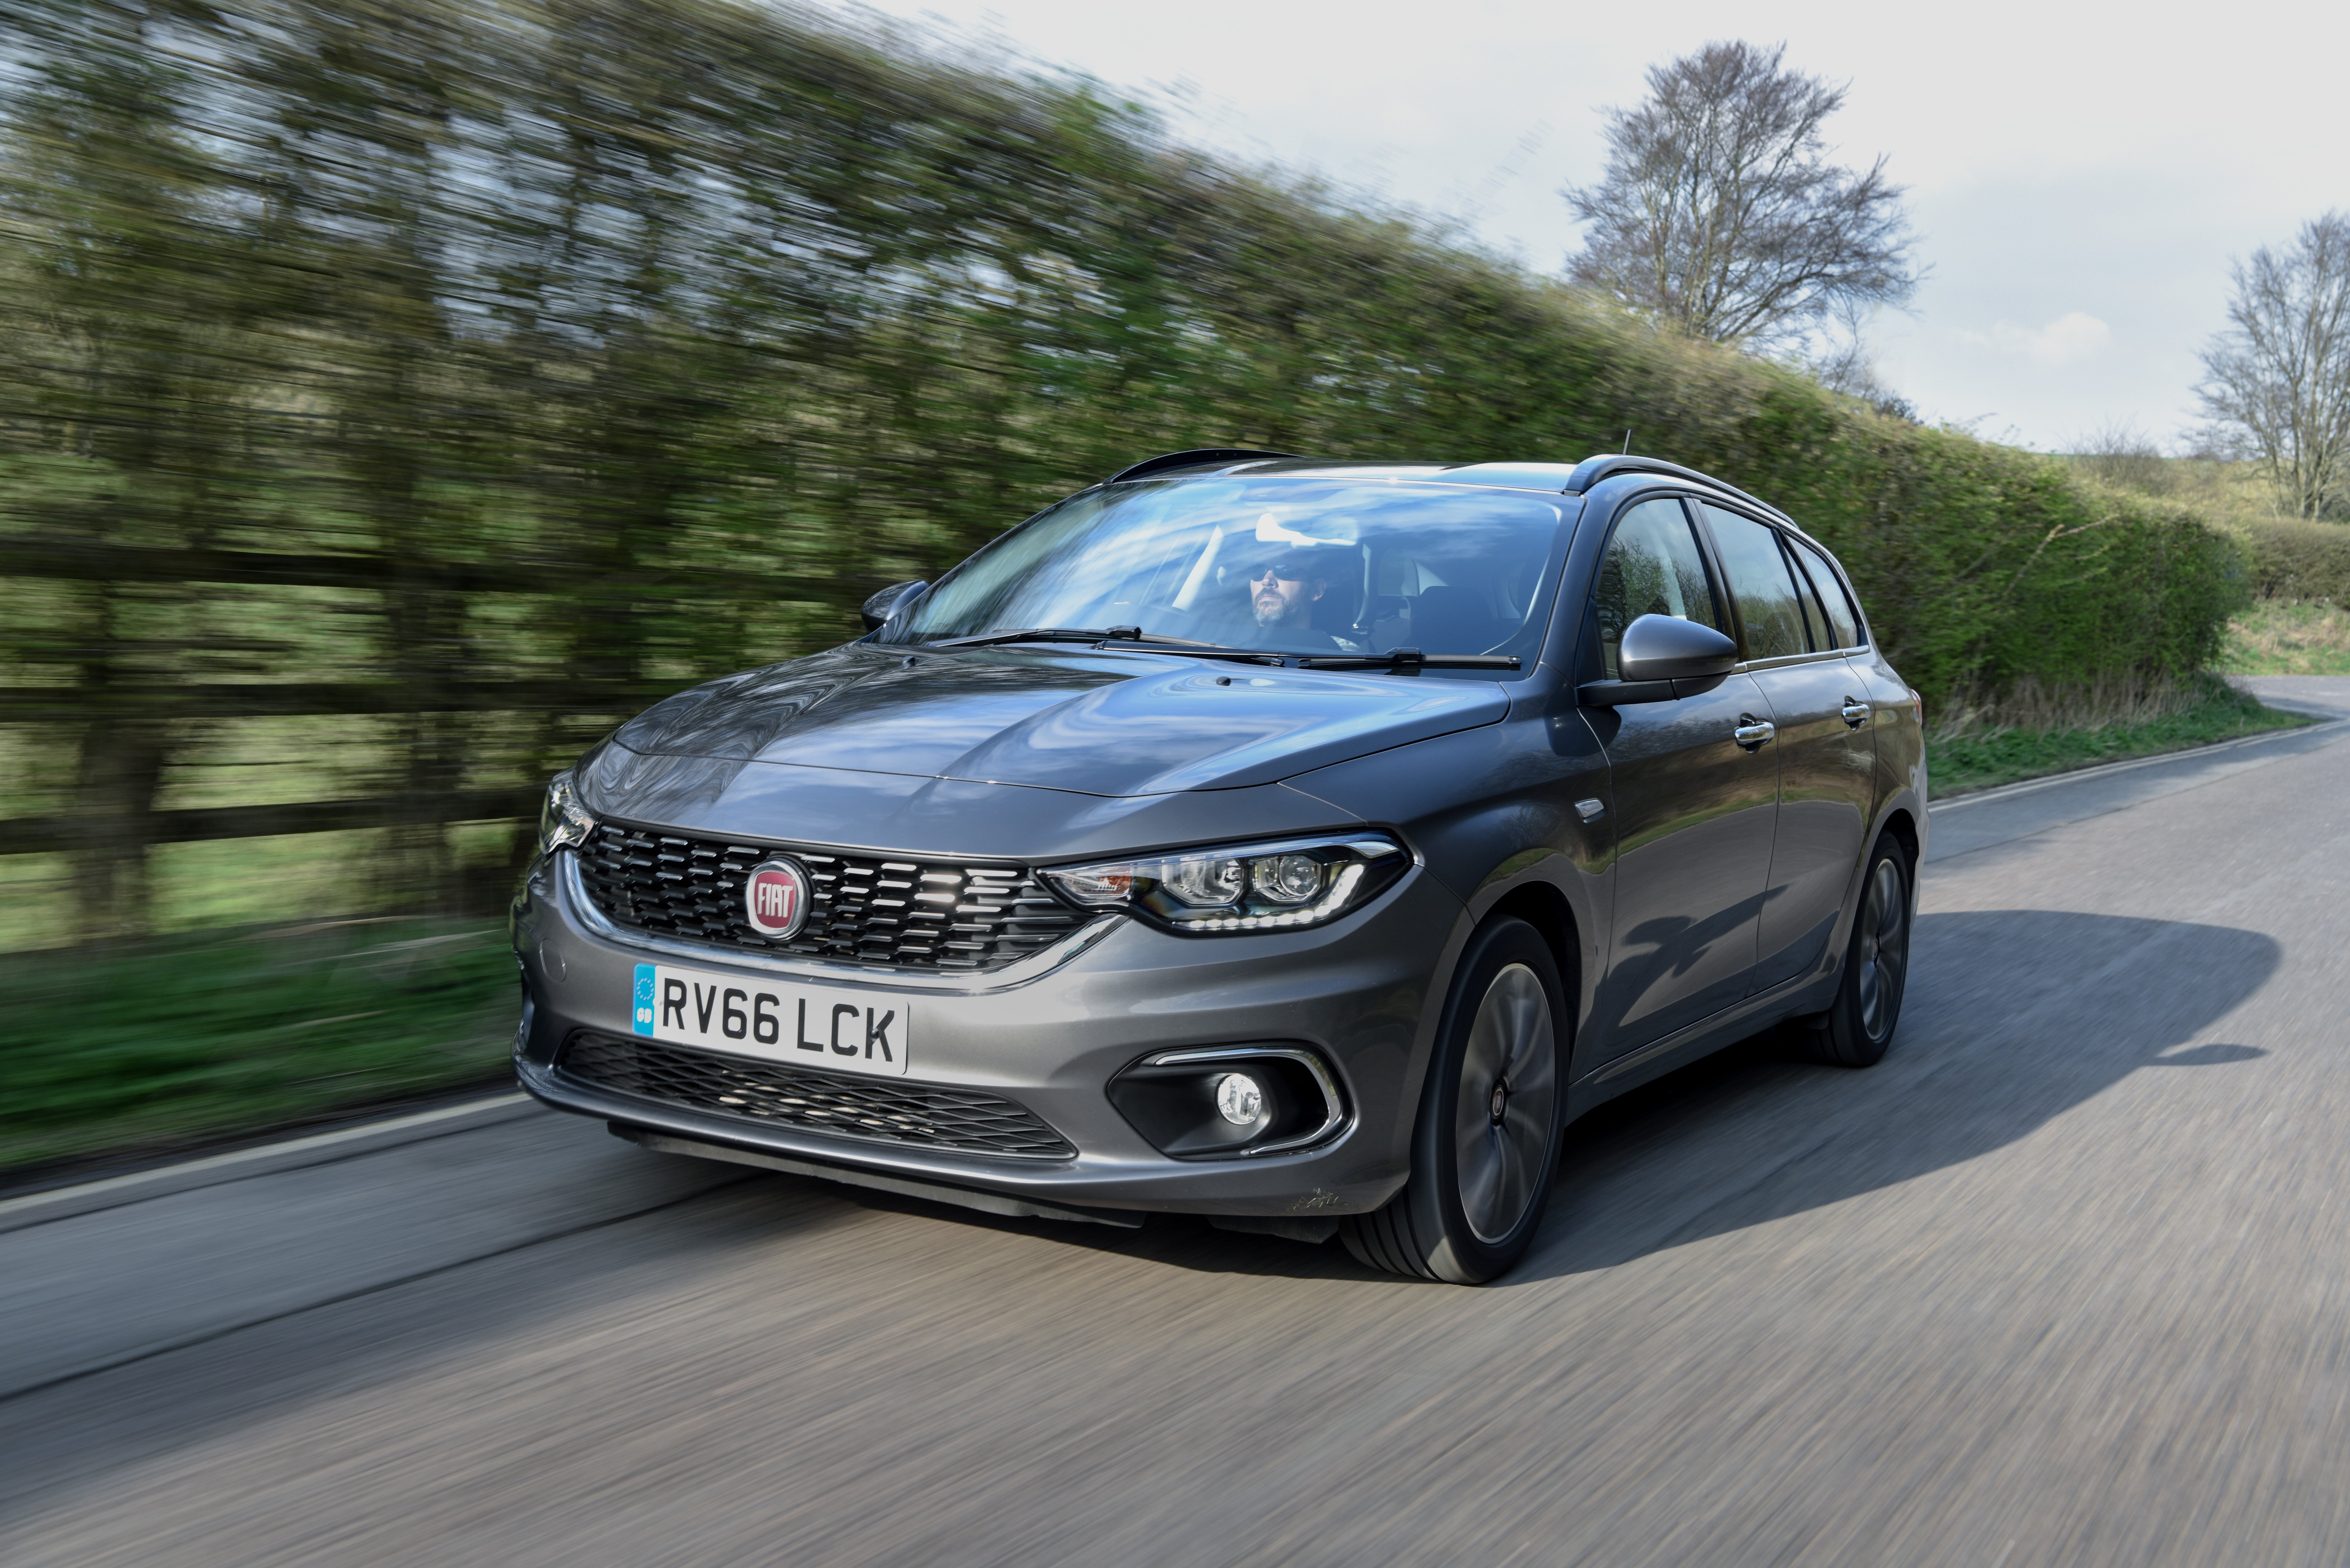 Fiat Tipo SW driving